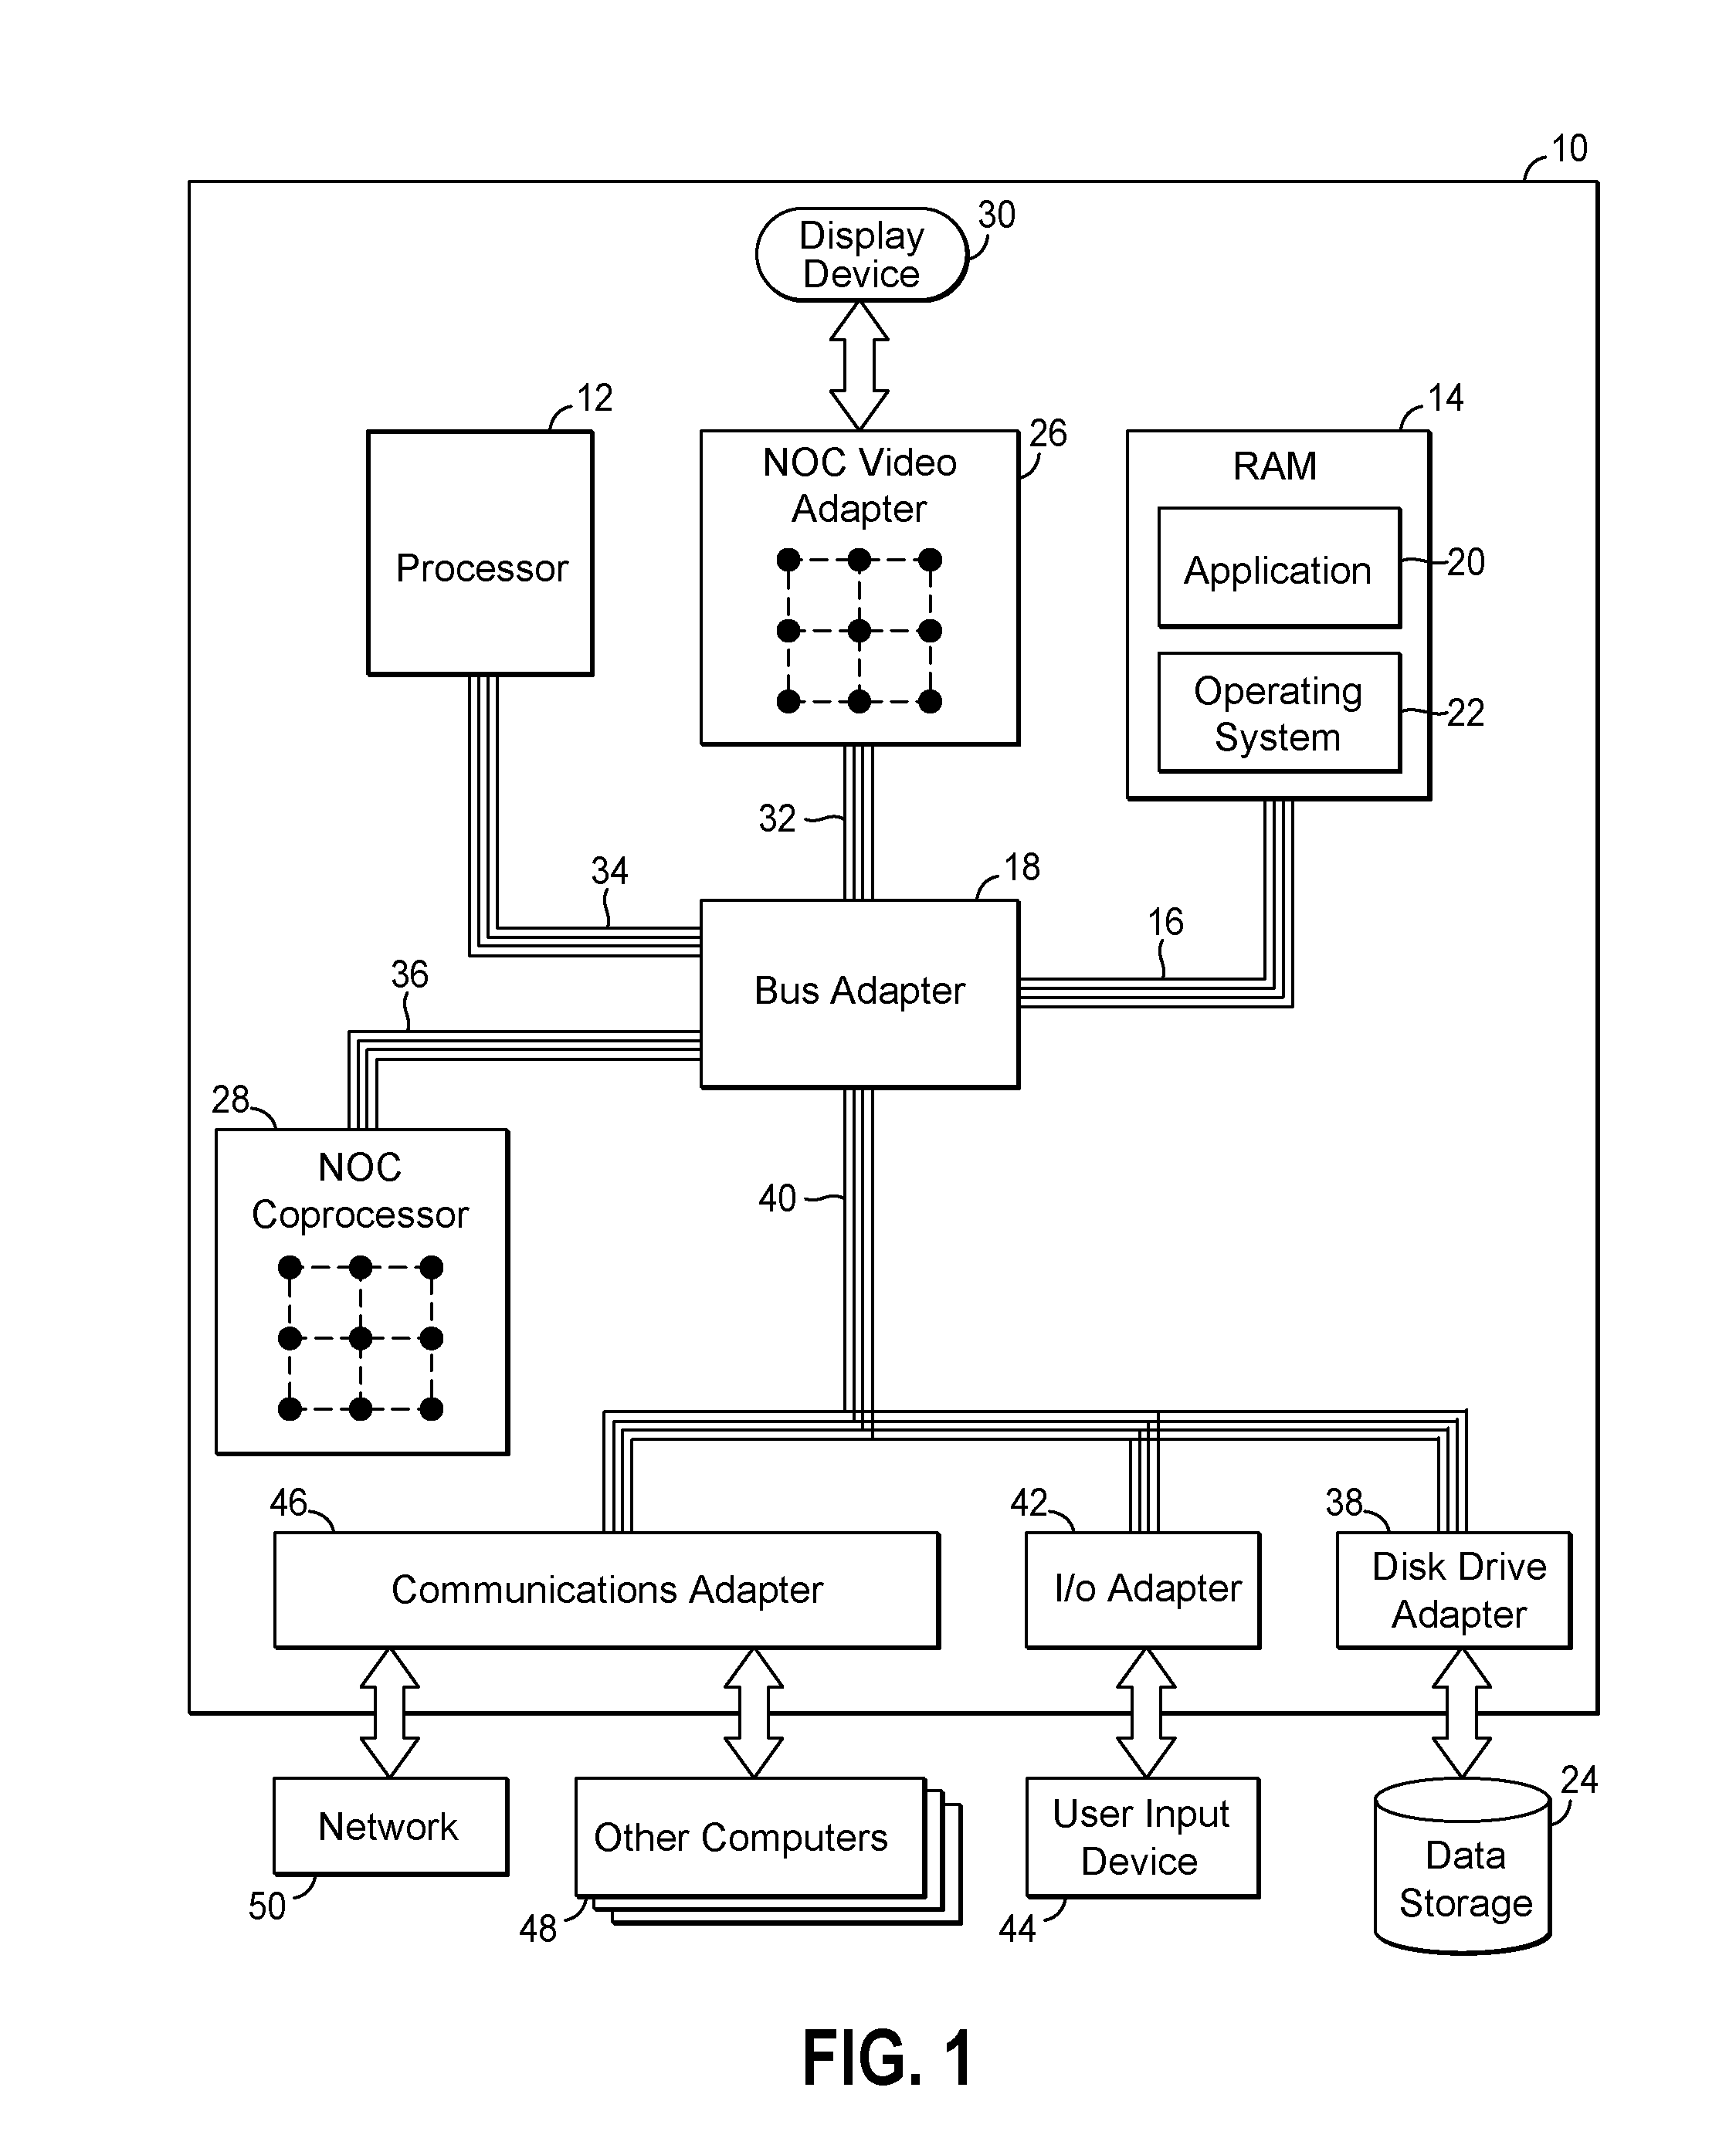 Indirect inter-thread communication using a shared pool of inboxes